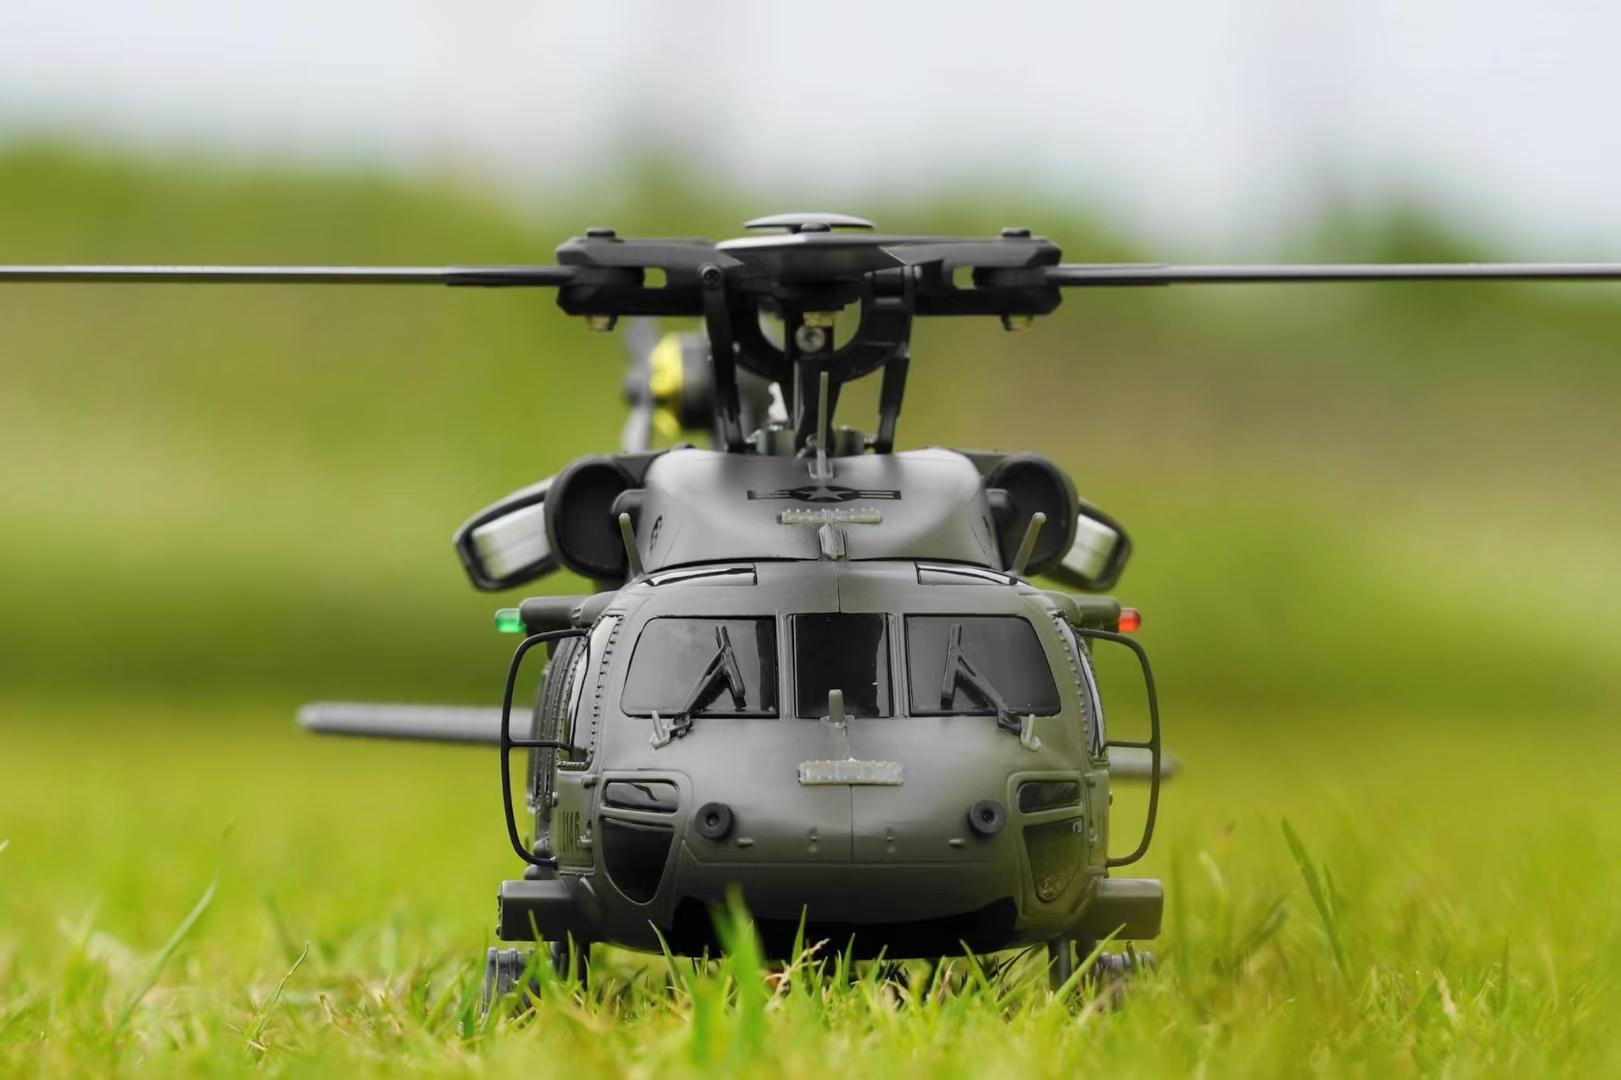 Rc Helicopter That Shoots Bbs: Target with Precision: Shoot up to 12 BBs at Once!